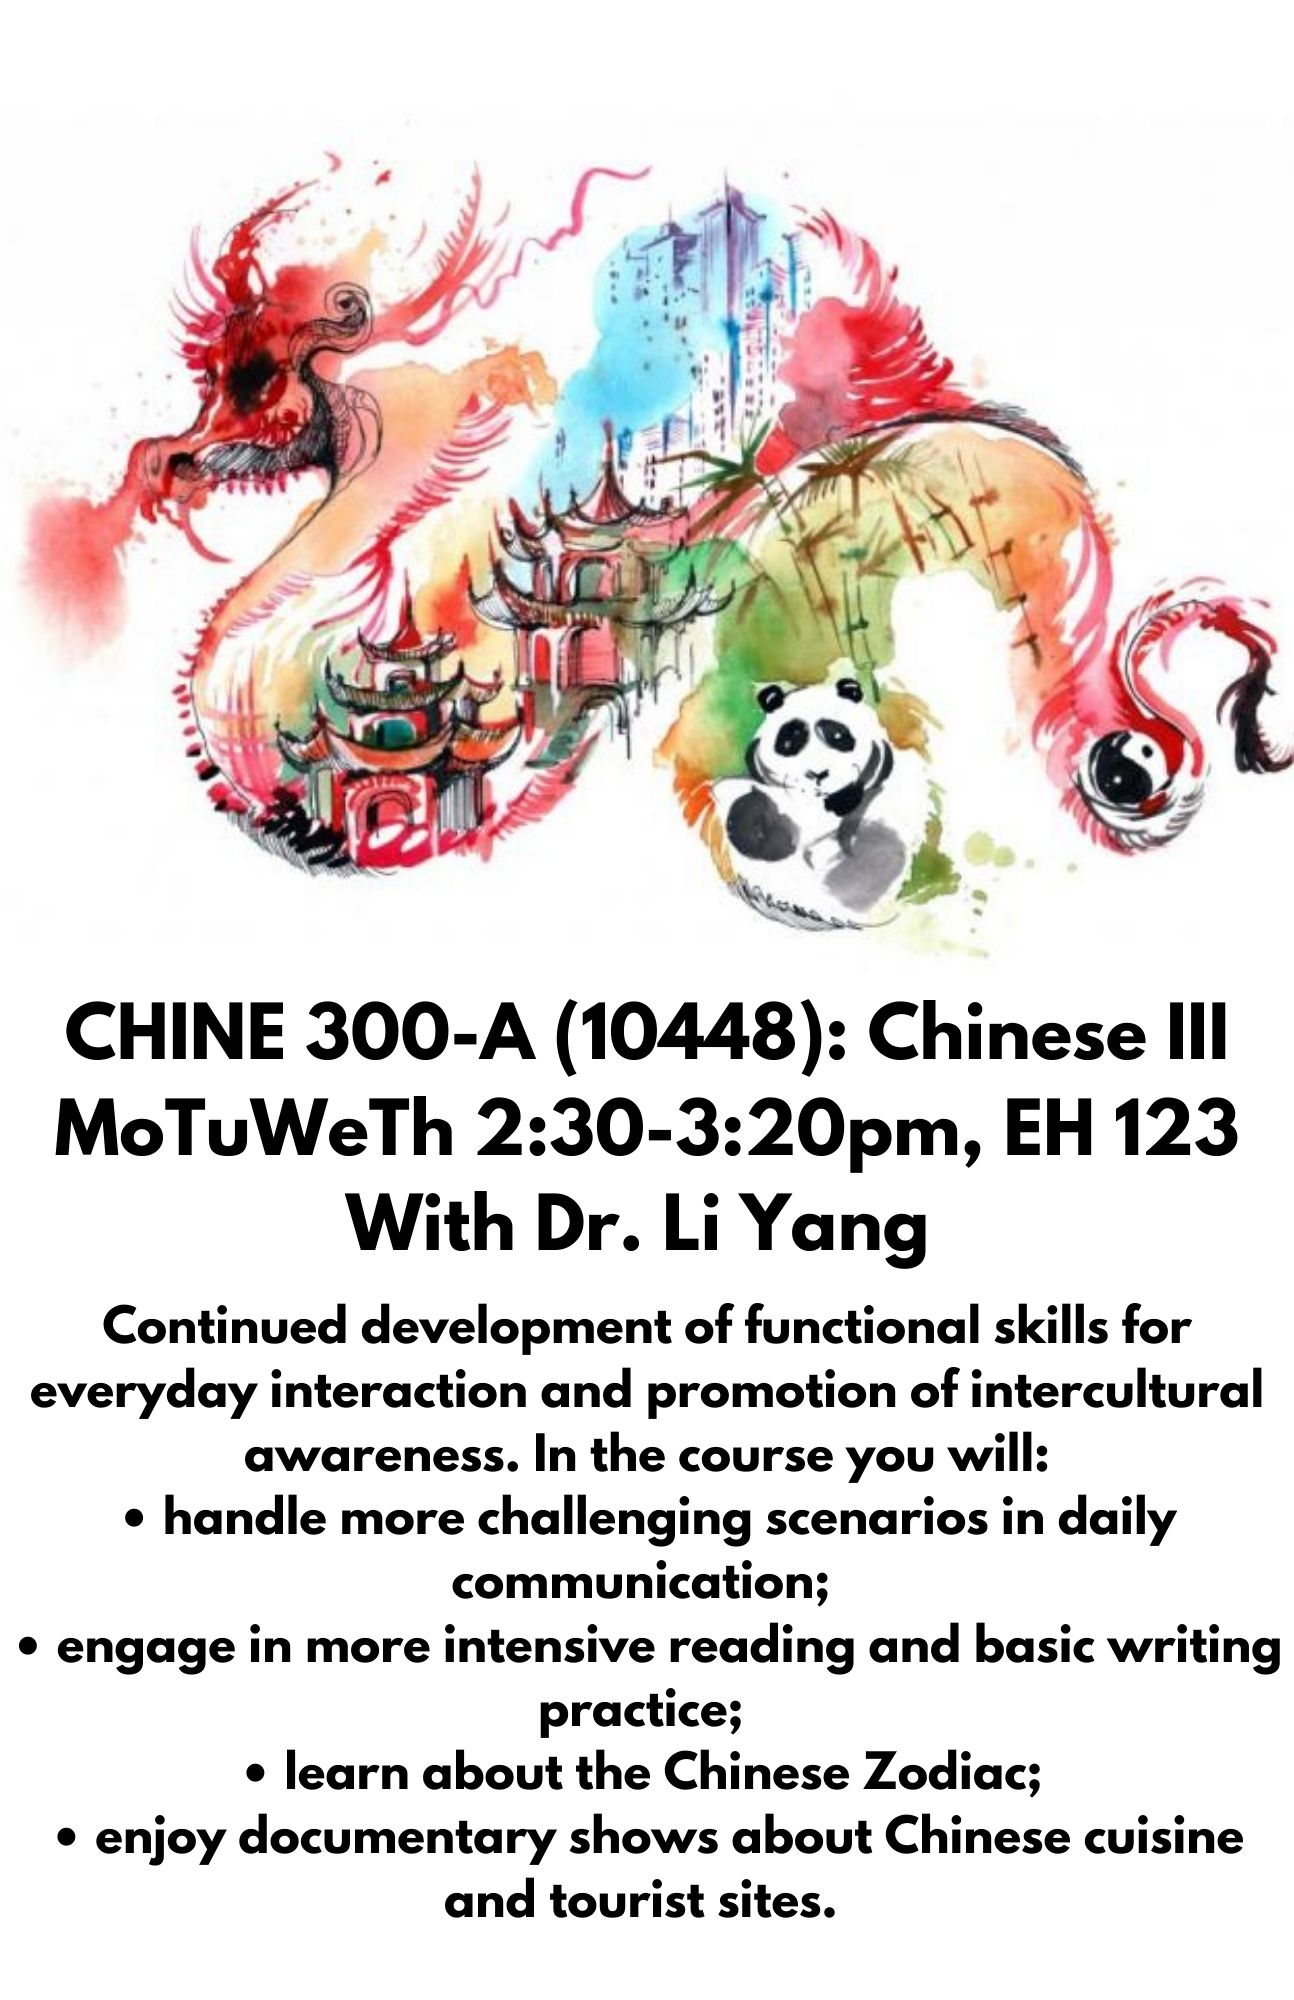 CHINE 300-A (10448): Chinese III MoTuWeTh 2:30-3:20pm, EH 123 With Dr. Li Yang. Continued development of functional skills for everyday interaction and promotion of intercultural awareness. In the course you will: • handle more challenging scenarios in daily communication;  • engage in more intensive reading and basic writing practice;  • learn about the Chinese Zodiac;  • enjoy documentary shows about Chinese cuisine and tourist sites. 